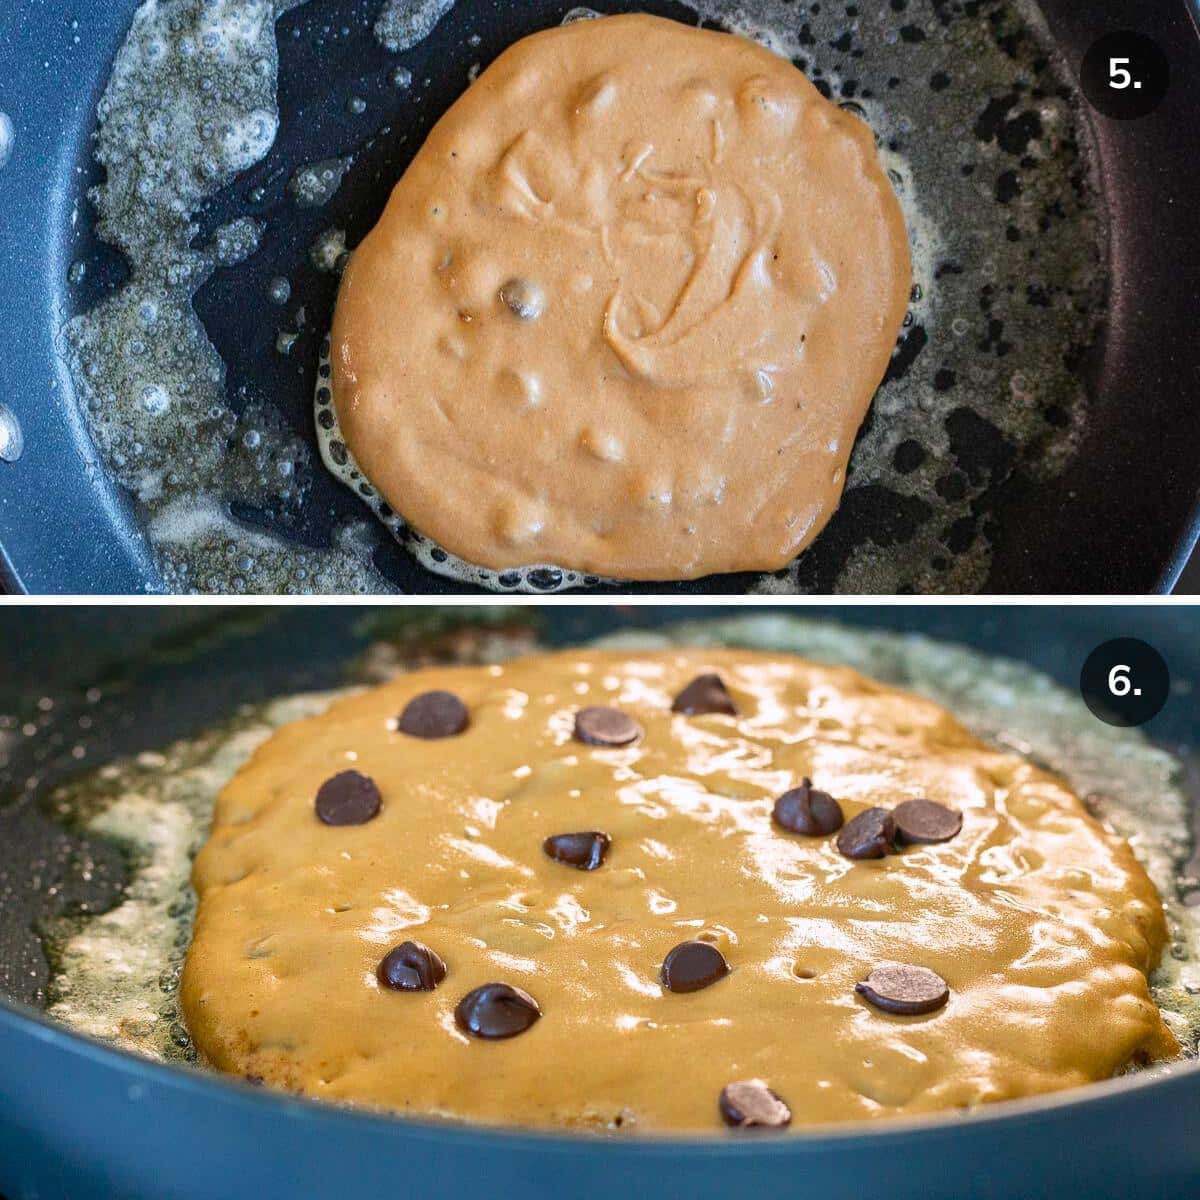 Coffee pancake batter poured into the pan and dark chocolate dairy free chips sprinkled on top.